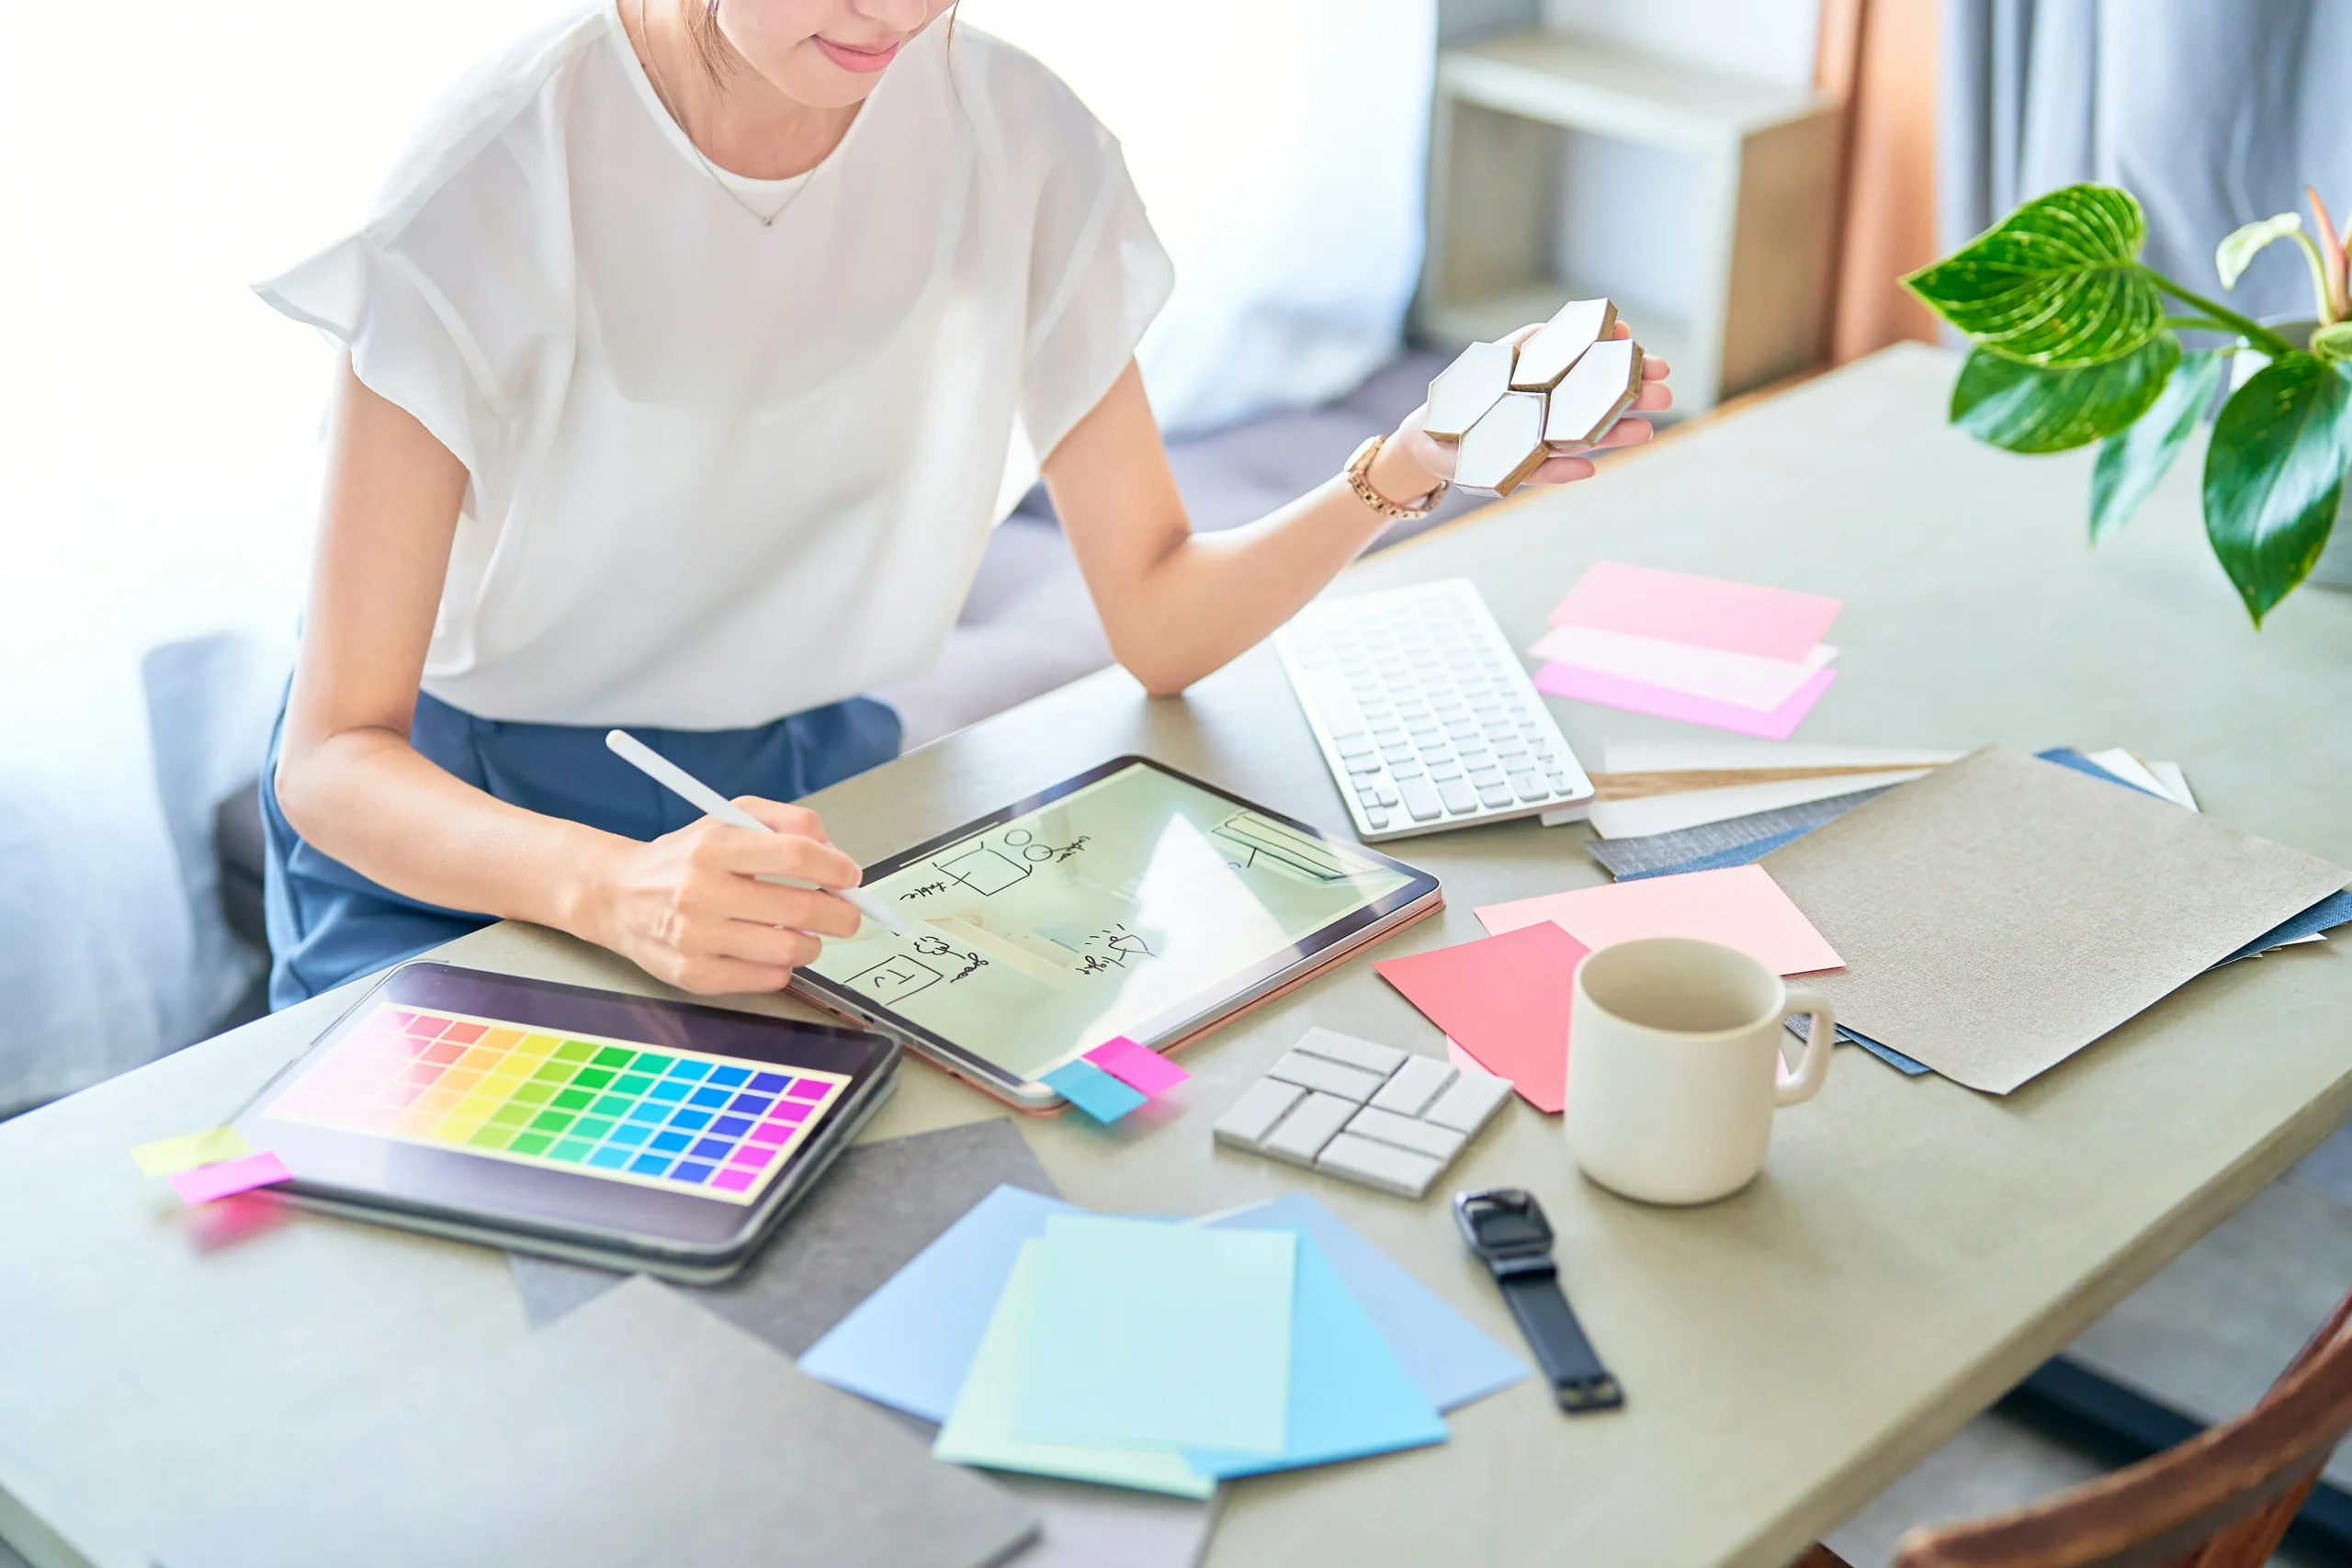 A woman looking over paint chips to help brands better use design elements.